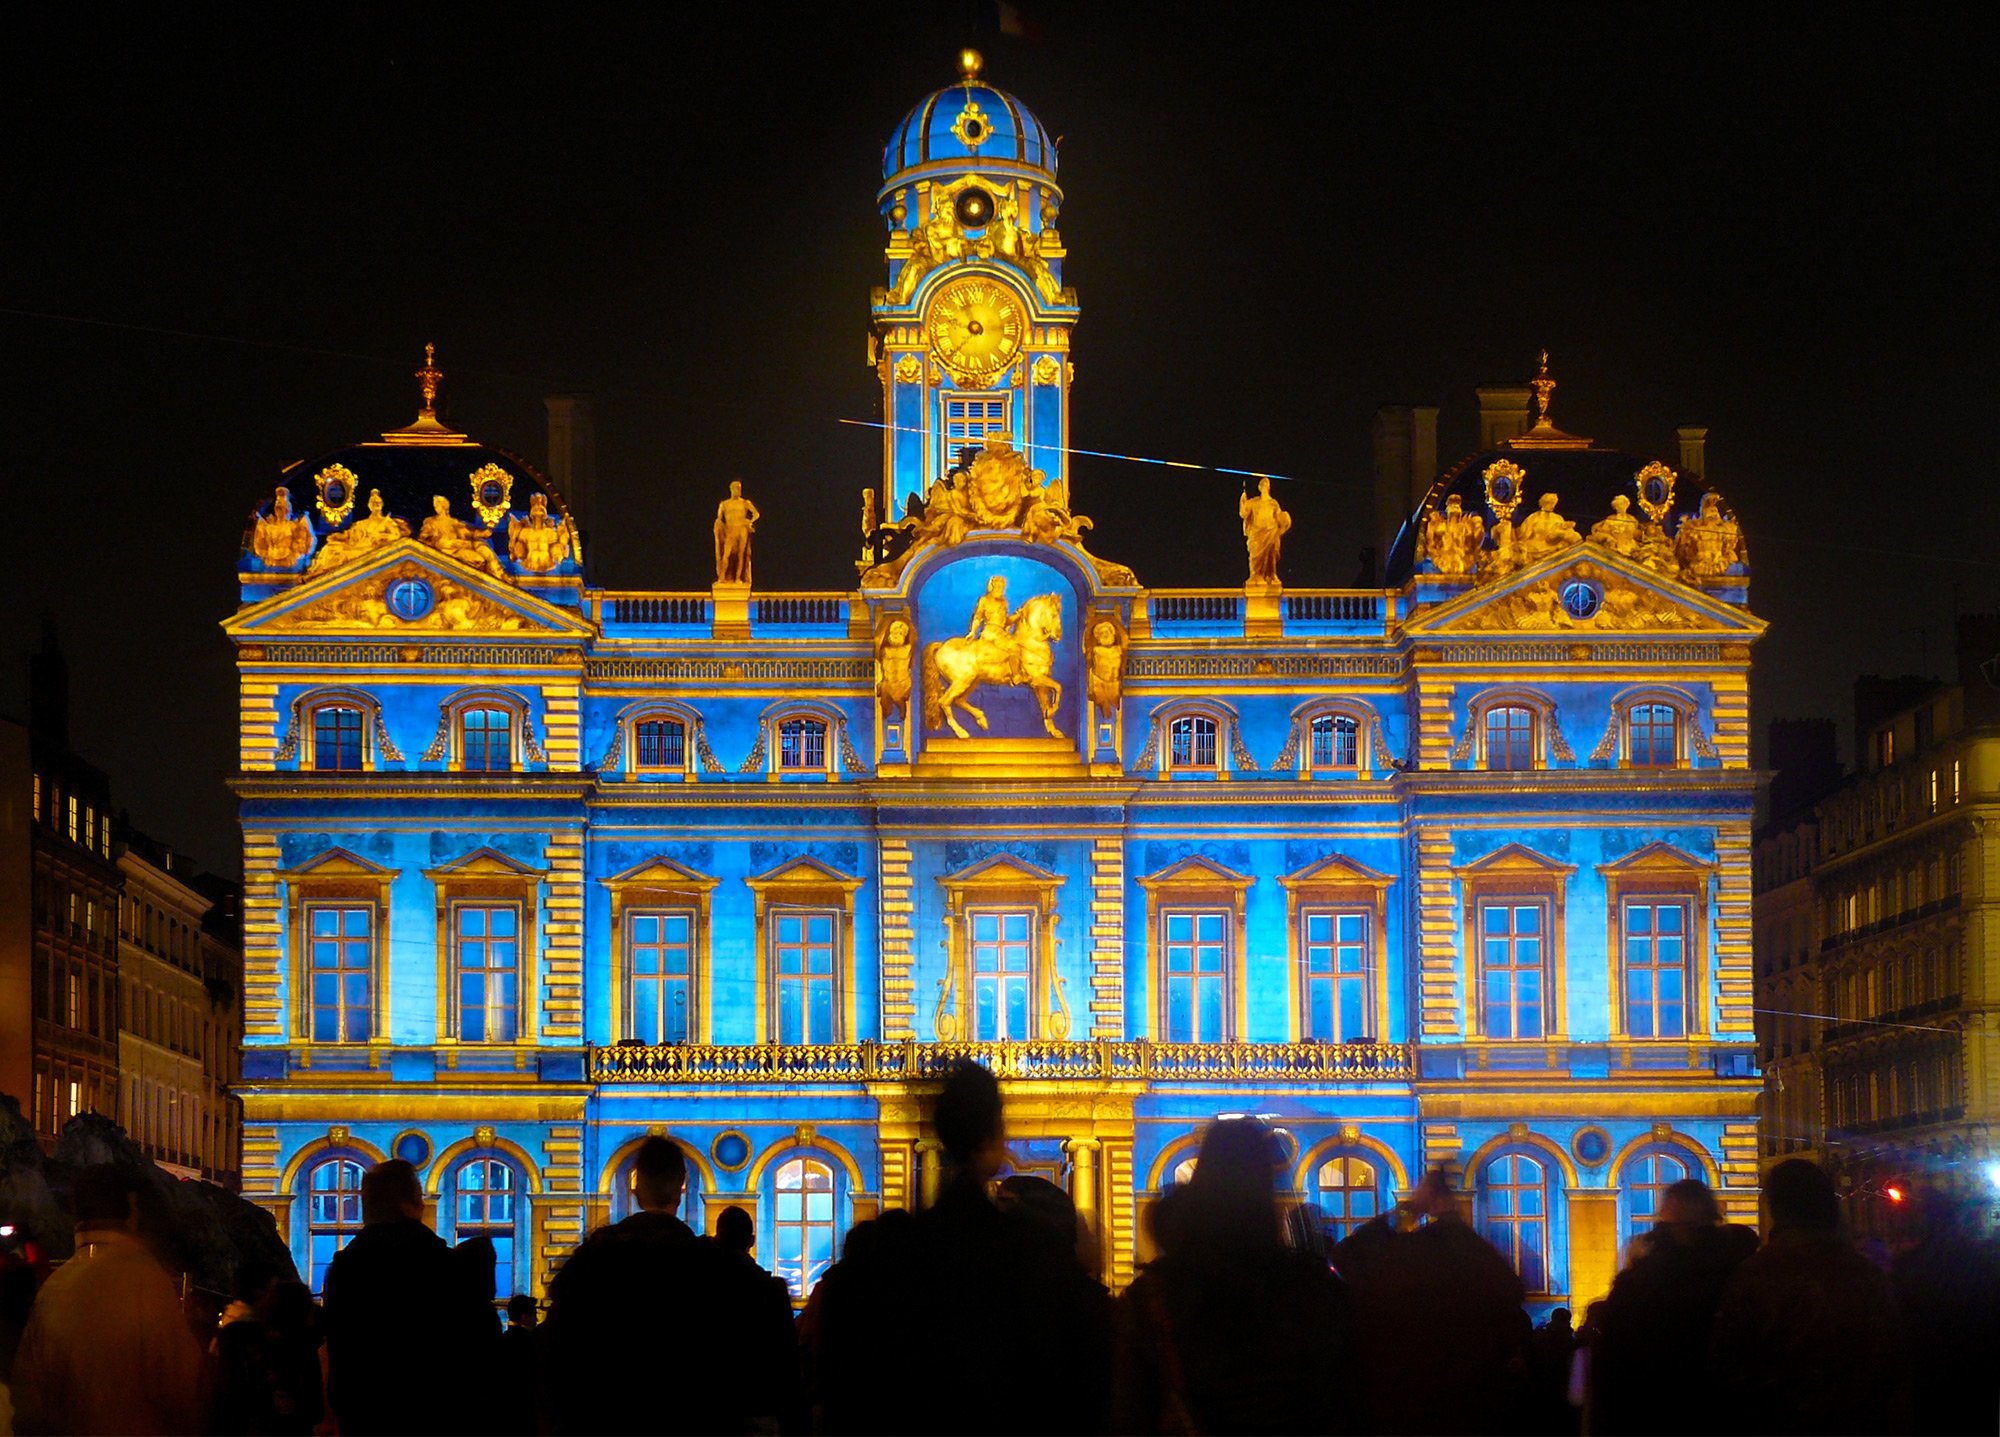 Stay at Lyon with University Rooms and witness the festival of lights